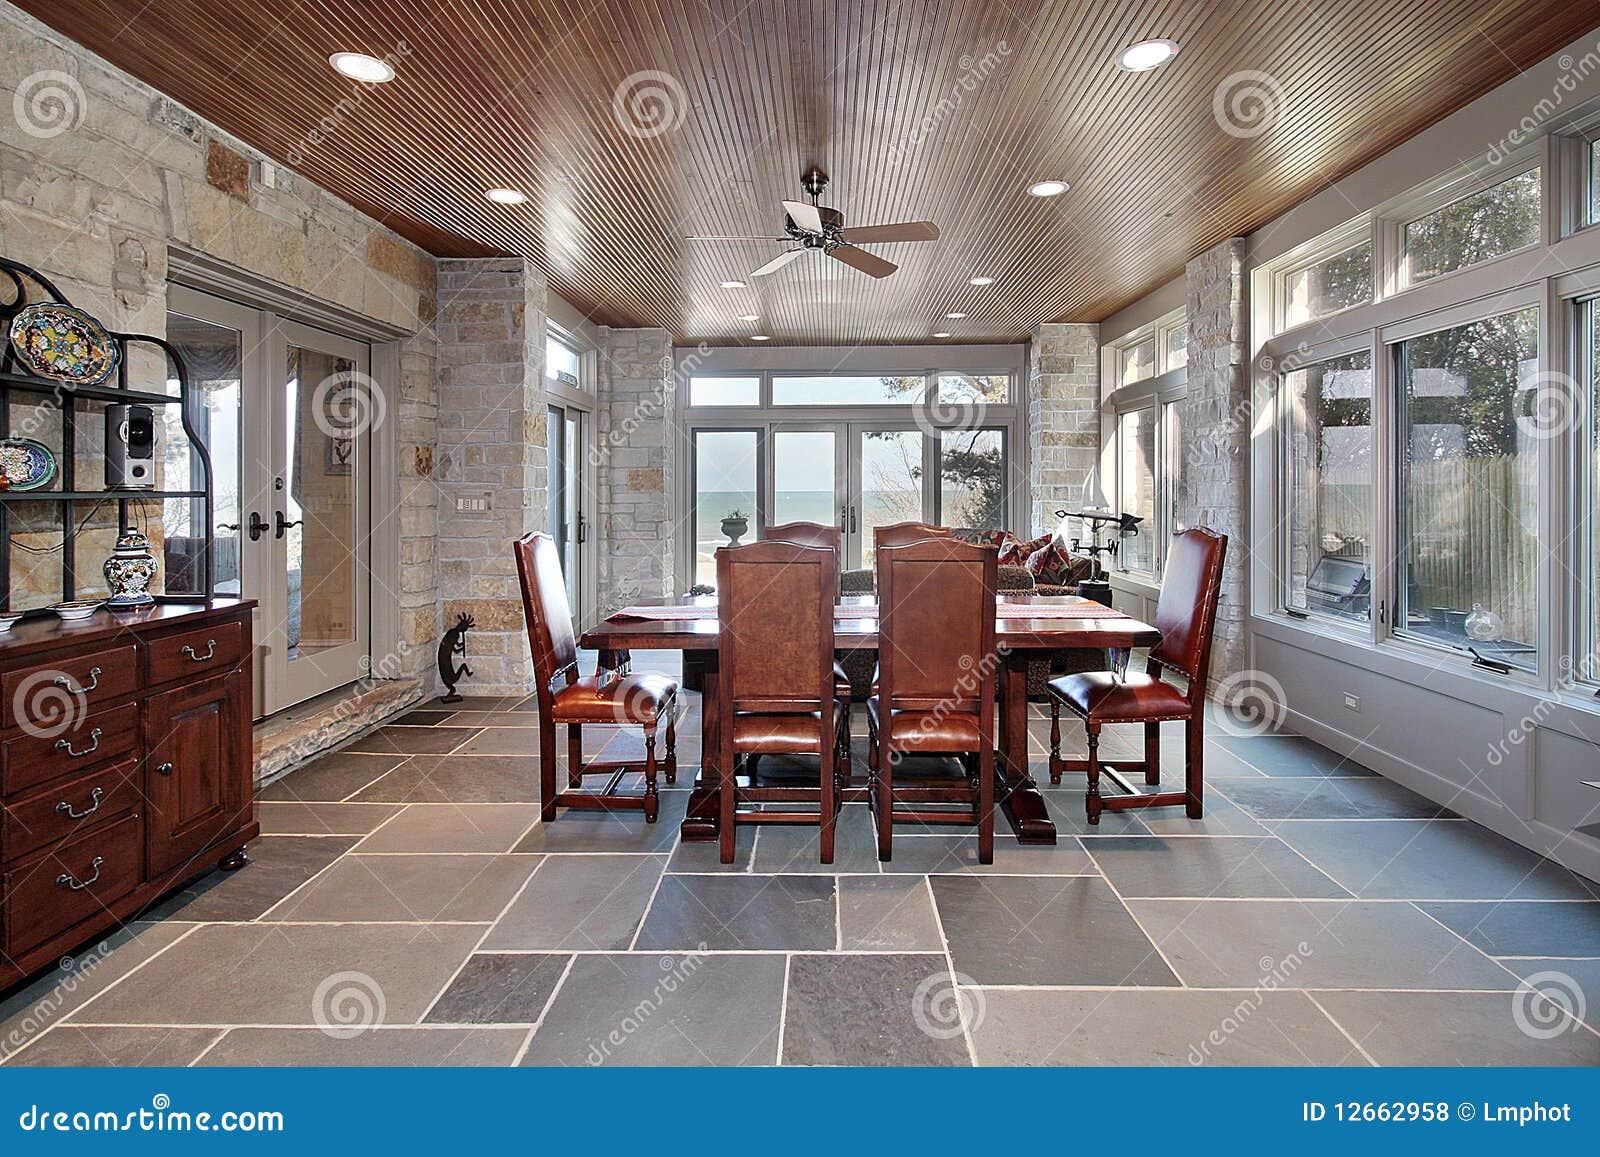 porch with stone walls and slate floors